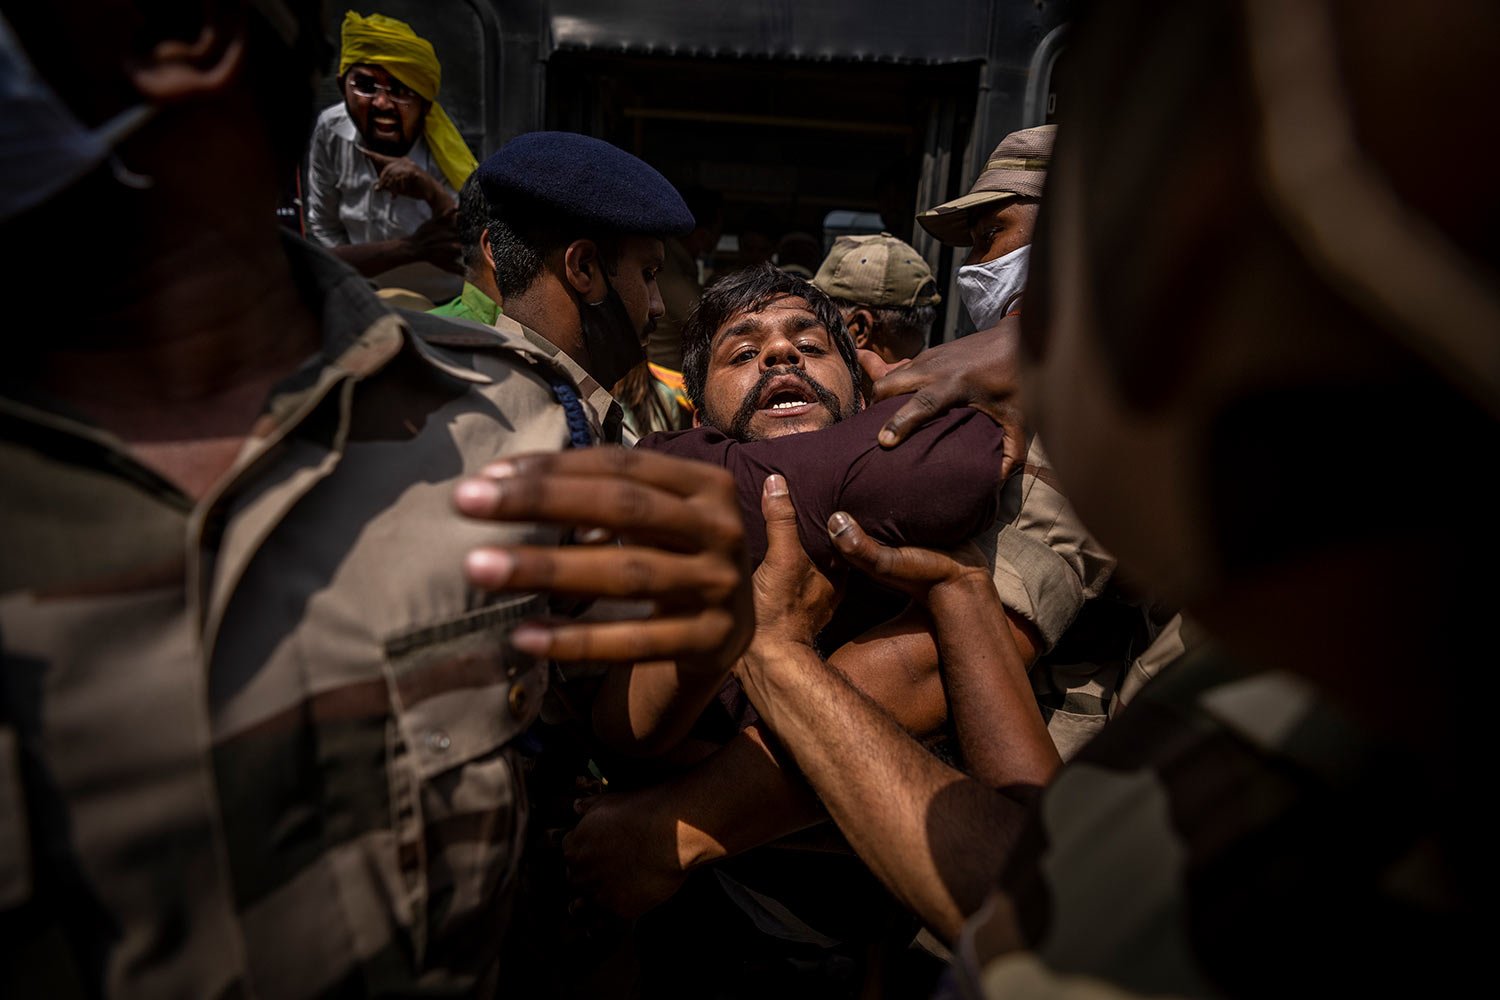  Indian paramilitary soldiers detain an opposition Congress party supporter during a protest against rising inflation and price hike of essential commodities in New Delhi, India, Wednesday, March 23, 2022. (AP Photo/Altaf Qadri) 